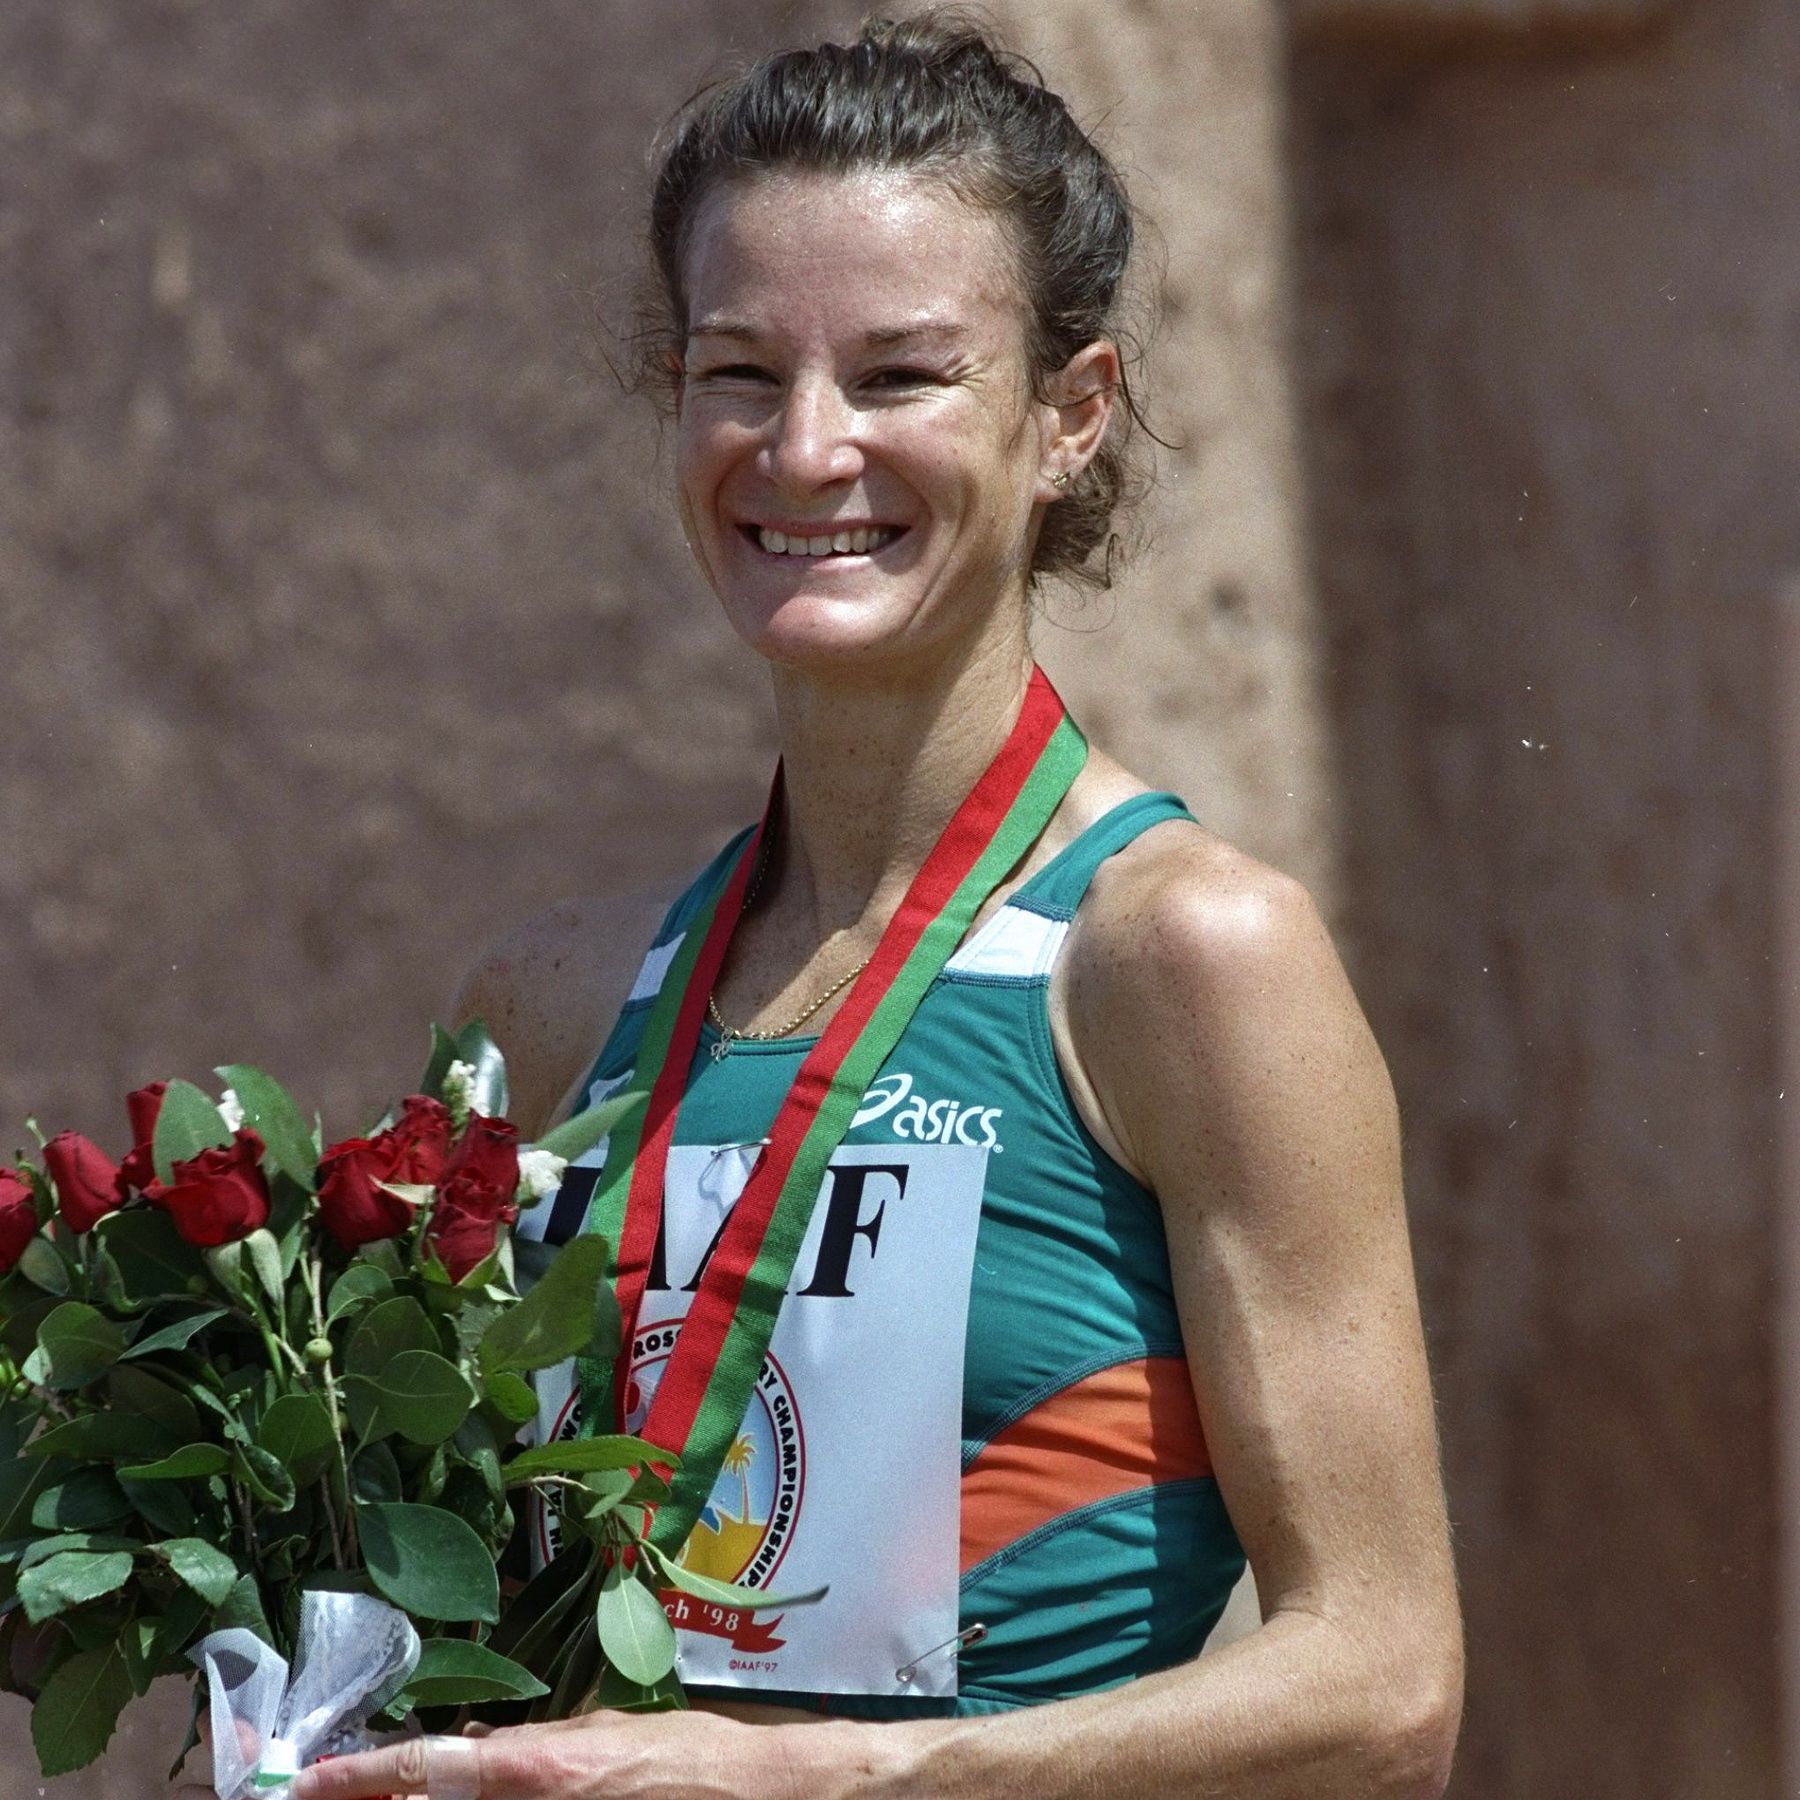 Sonia O'Sullivan on the podium at the 1998 World Cross Country Championships